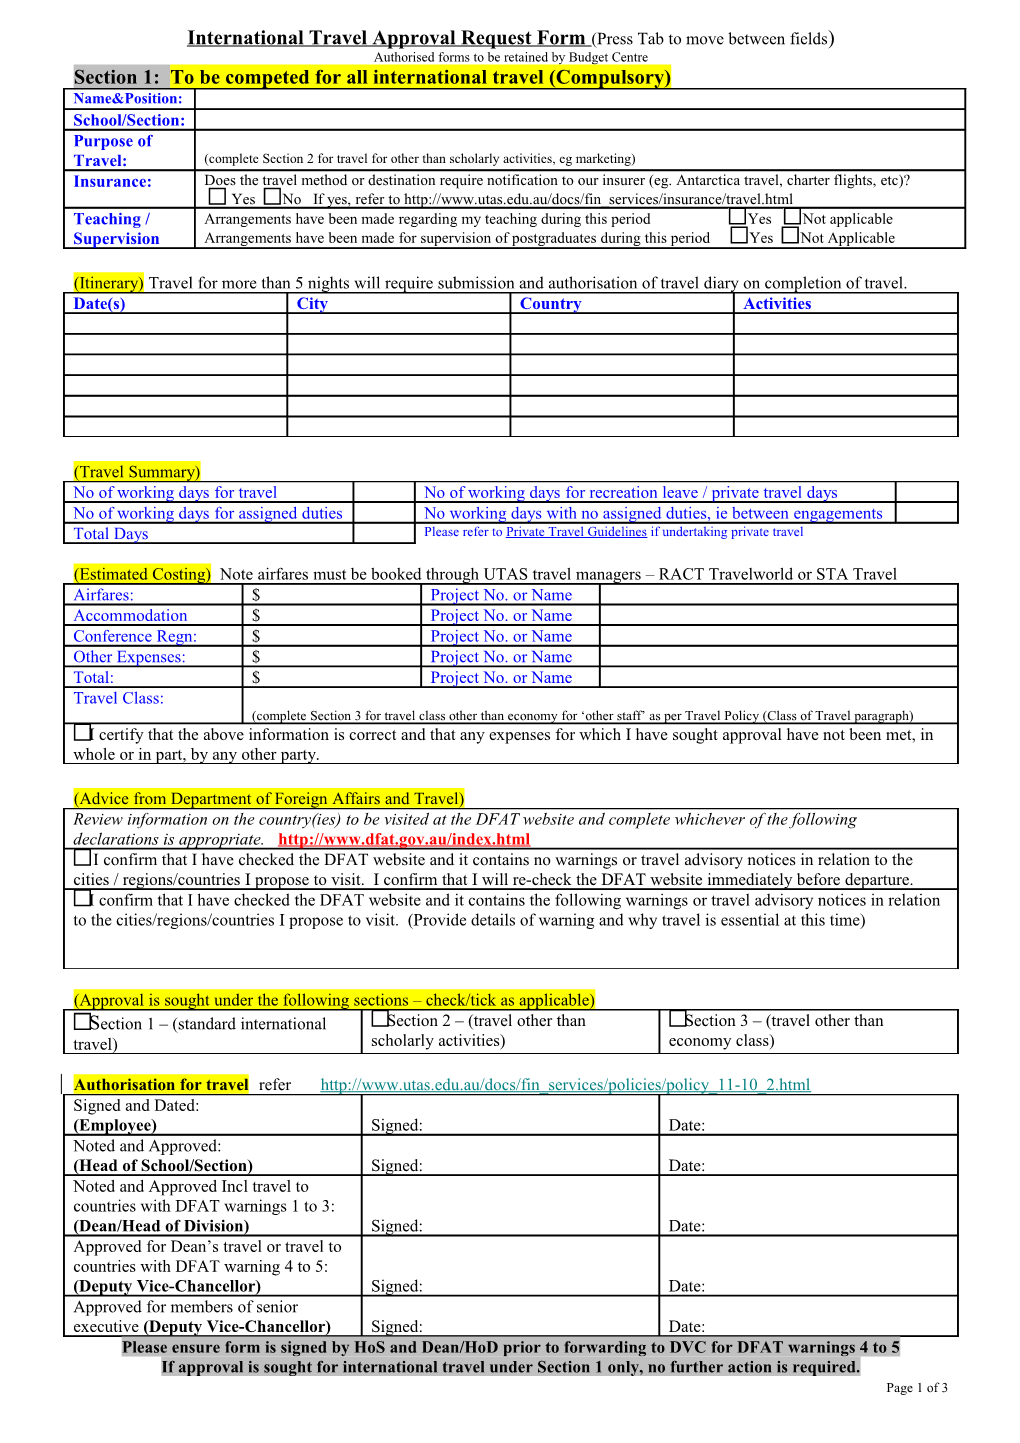 International Travel Approval Request Form (Press Tab to Move Between Fields)